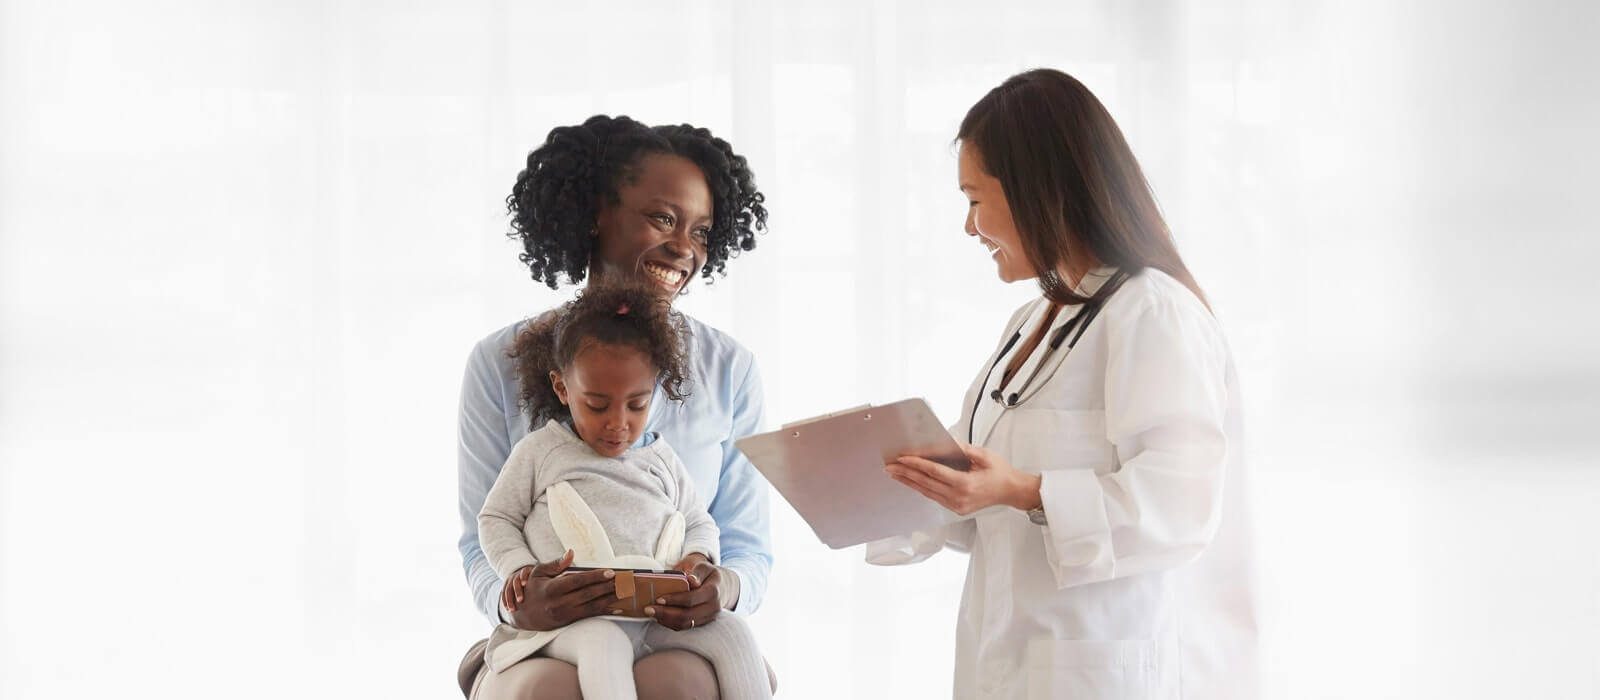 A mother speaking to a doctor while her daughter in her lap plays on cellphone.